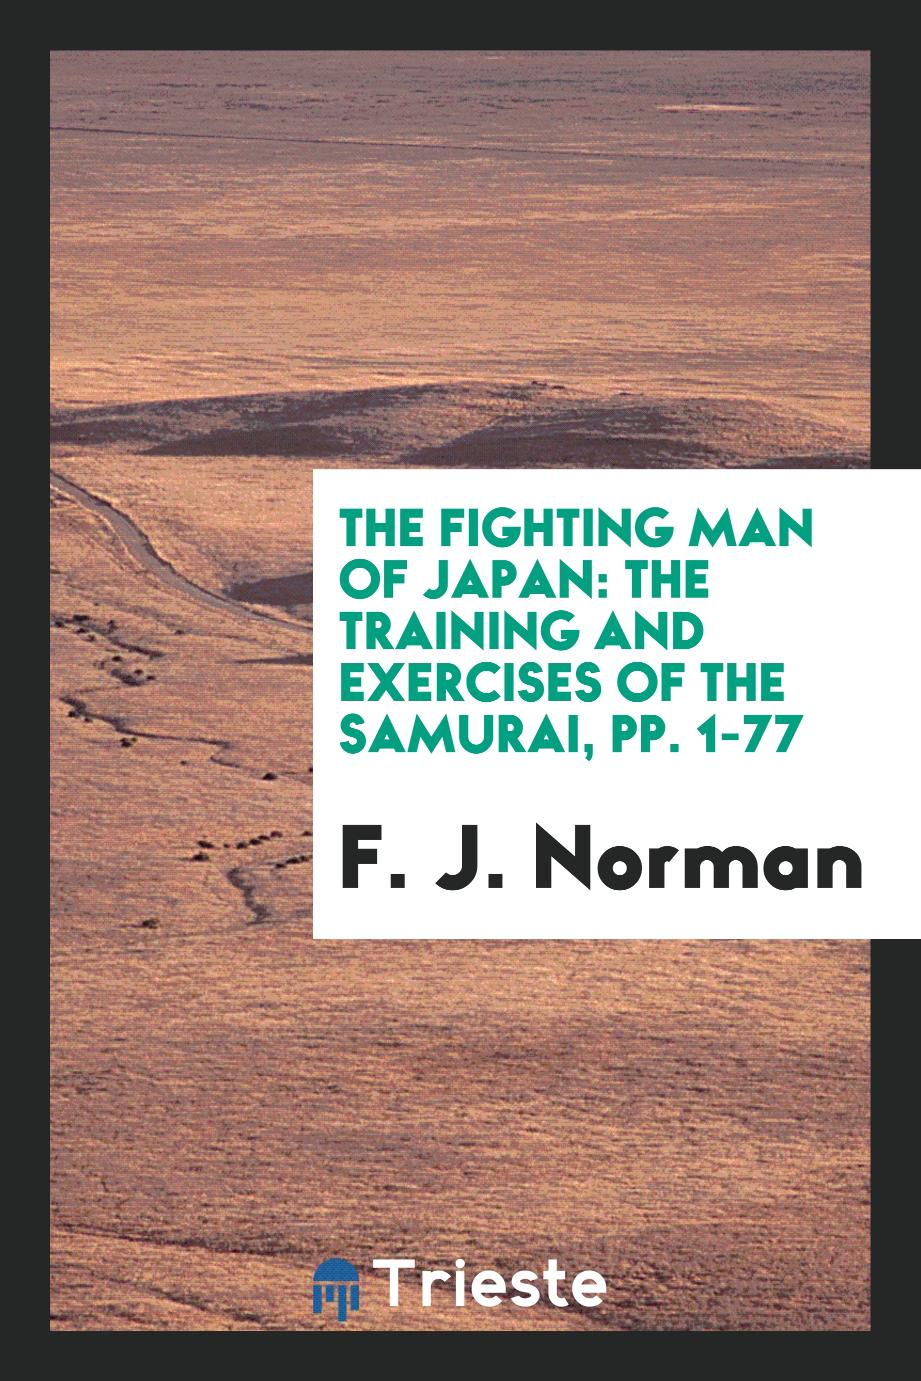 The Fighting Man of Japan: The Training and Exercises of the Samurai, pp. 1-77